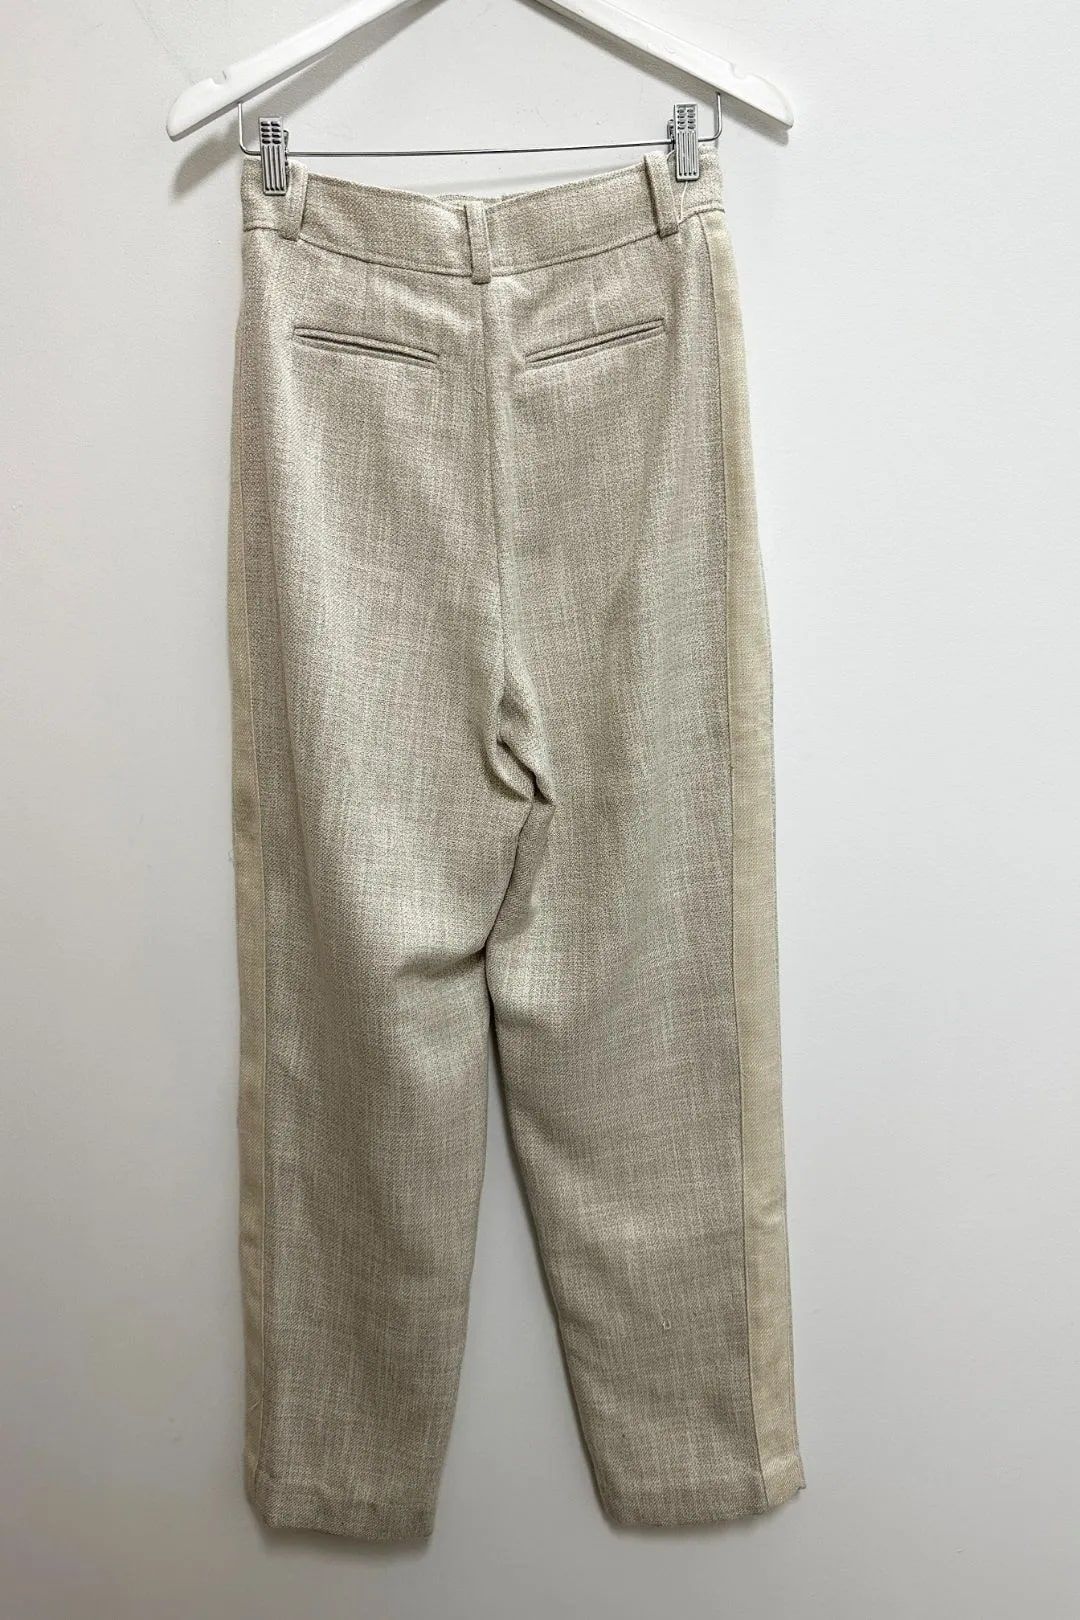 Acler Tweed High Waist Pants in Beige, ideal for sophisticated looks, purchase option